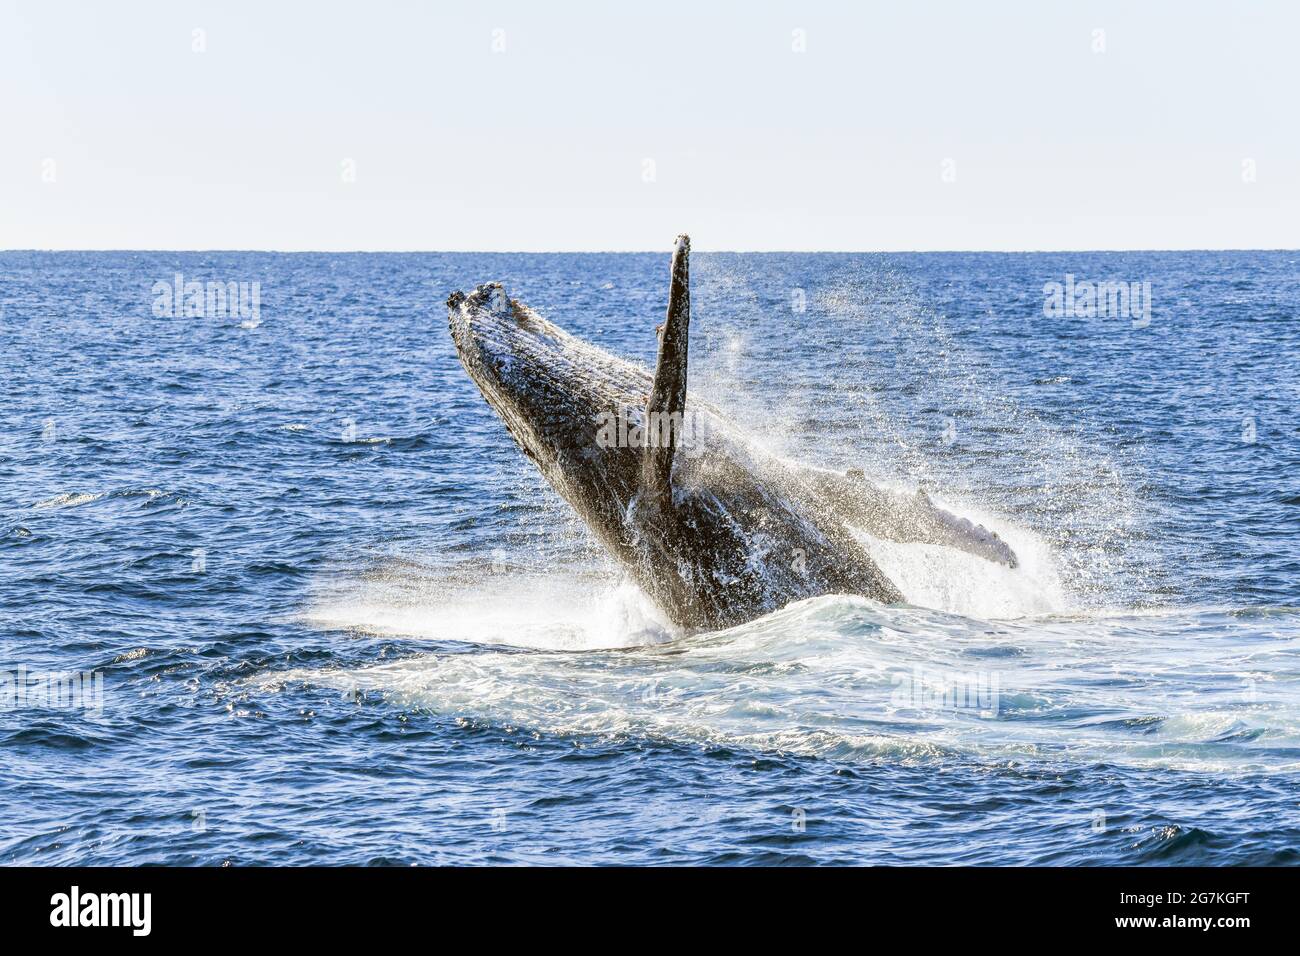 Whale showing off while breaching in the ocean Stock Photo